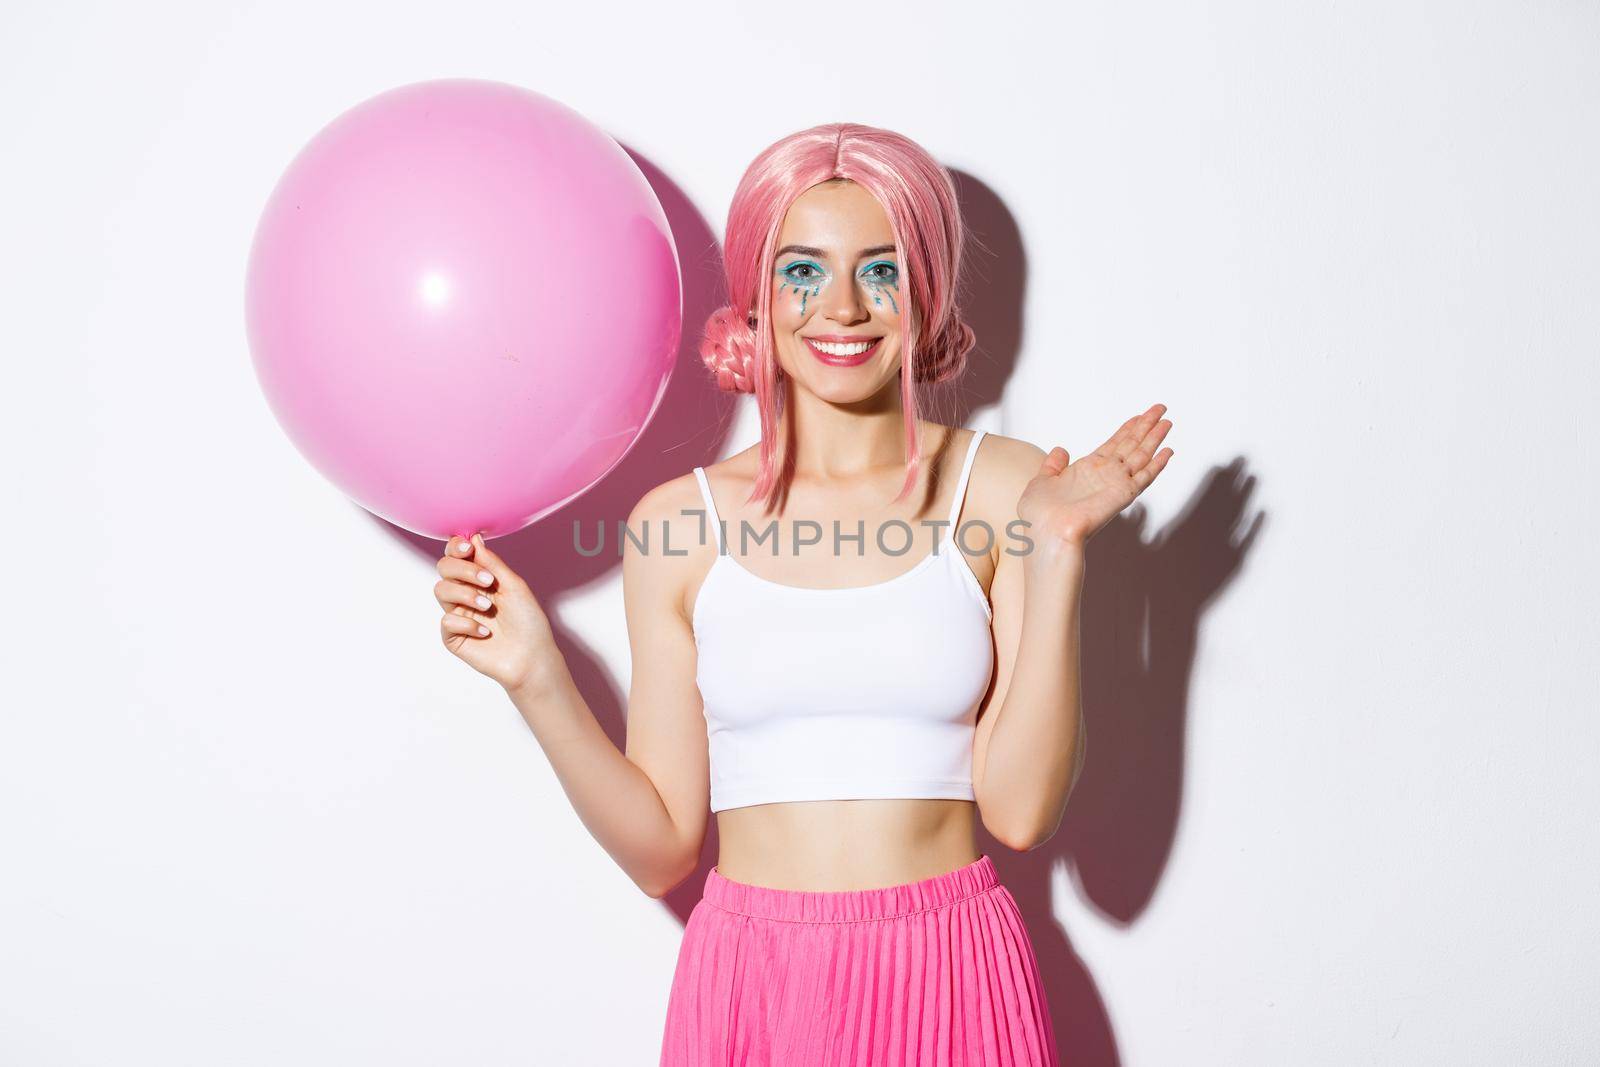 Image of cheerful young girl with pink wig and bright makeup, holding balloon and waving hand to say hi, greeting someone at party, celebrating holiday, white background.